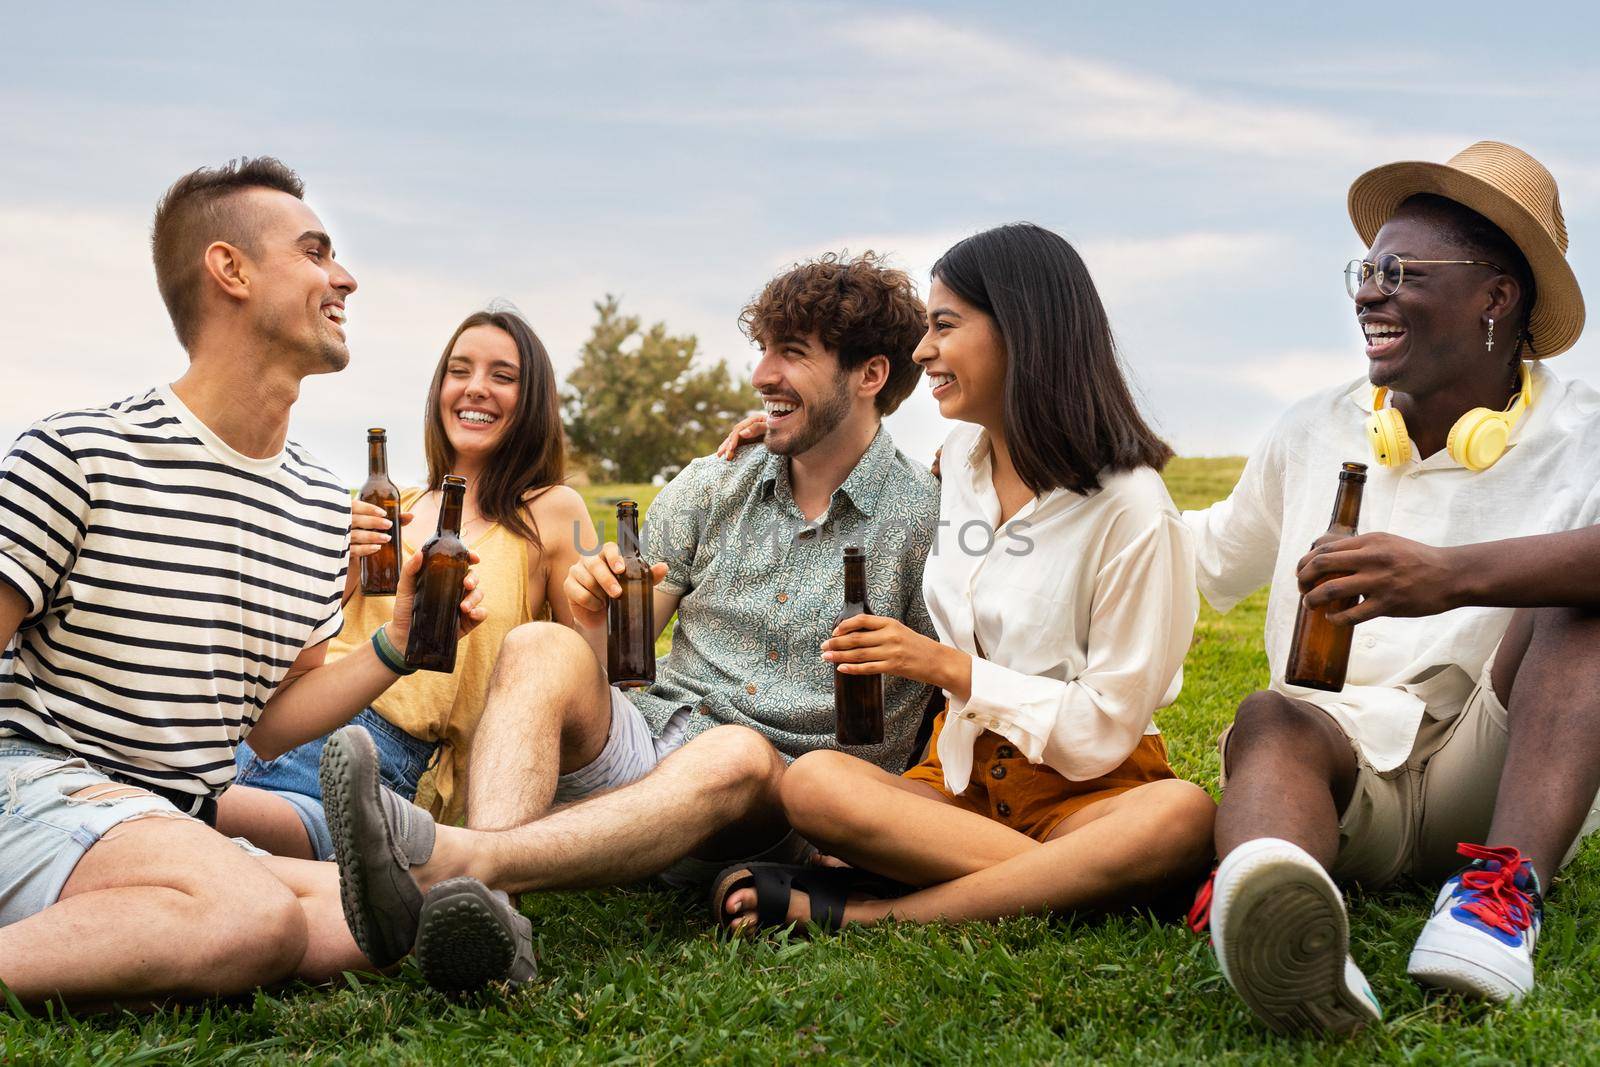 Multiracial friends laughing together enjoying some cool beer outdoors in park. Having fun. Friendship and community concepts.